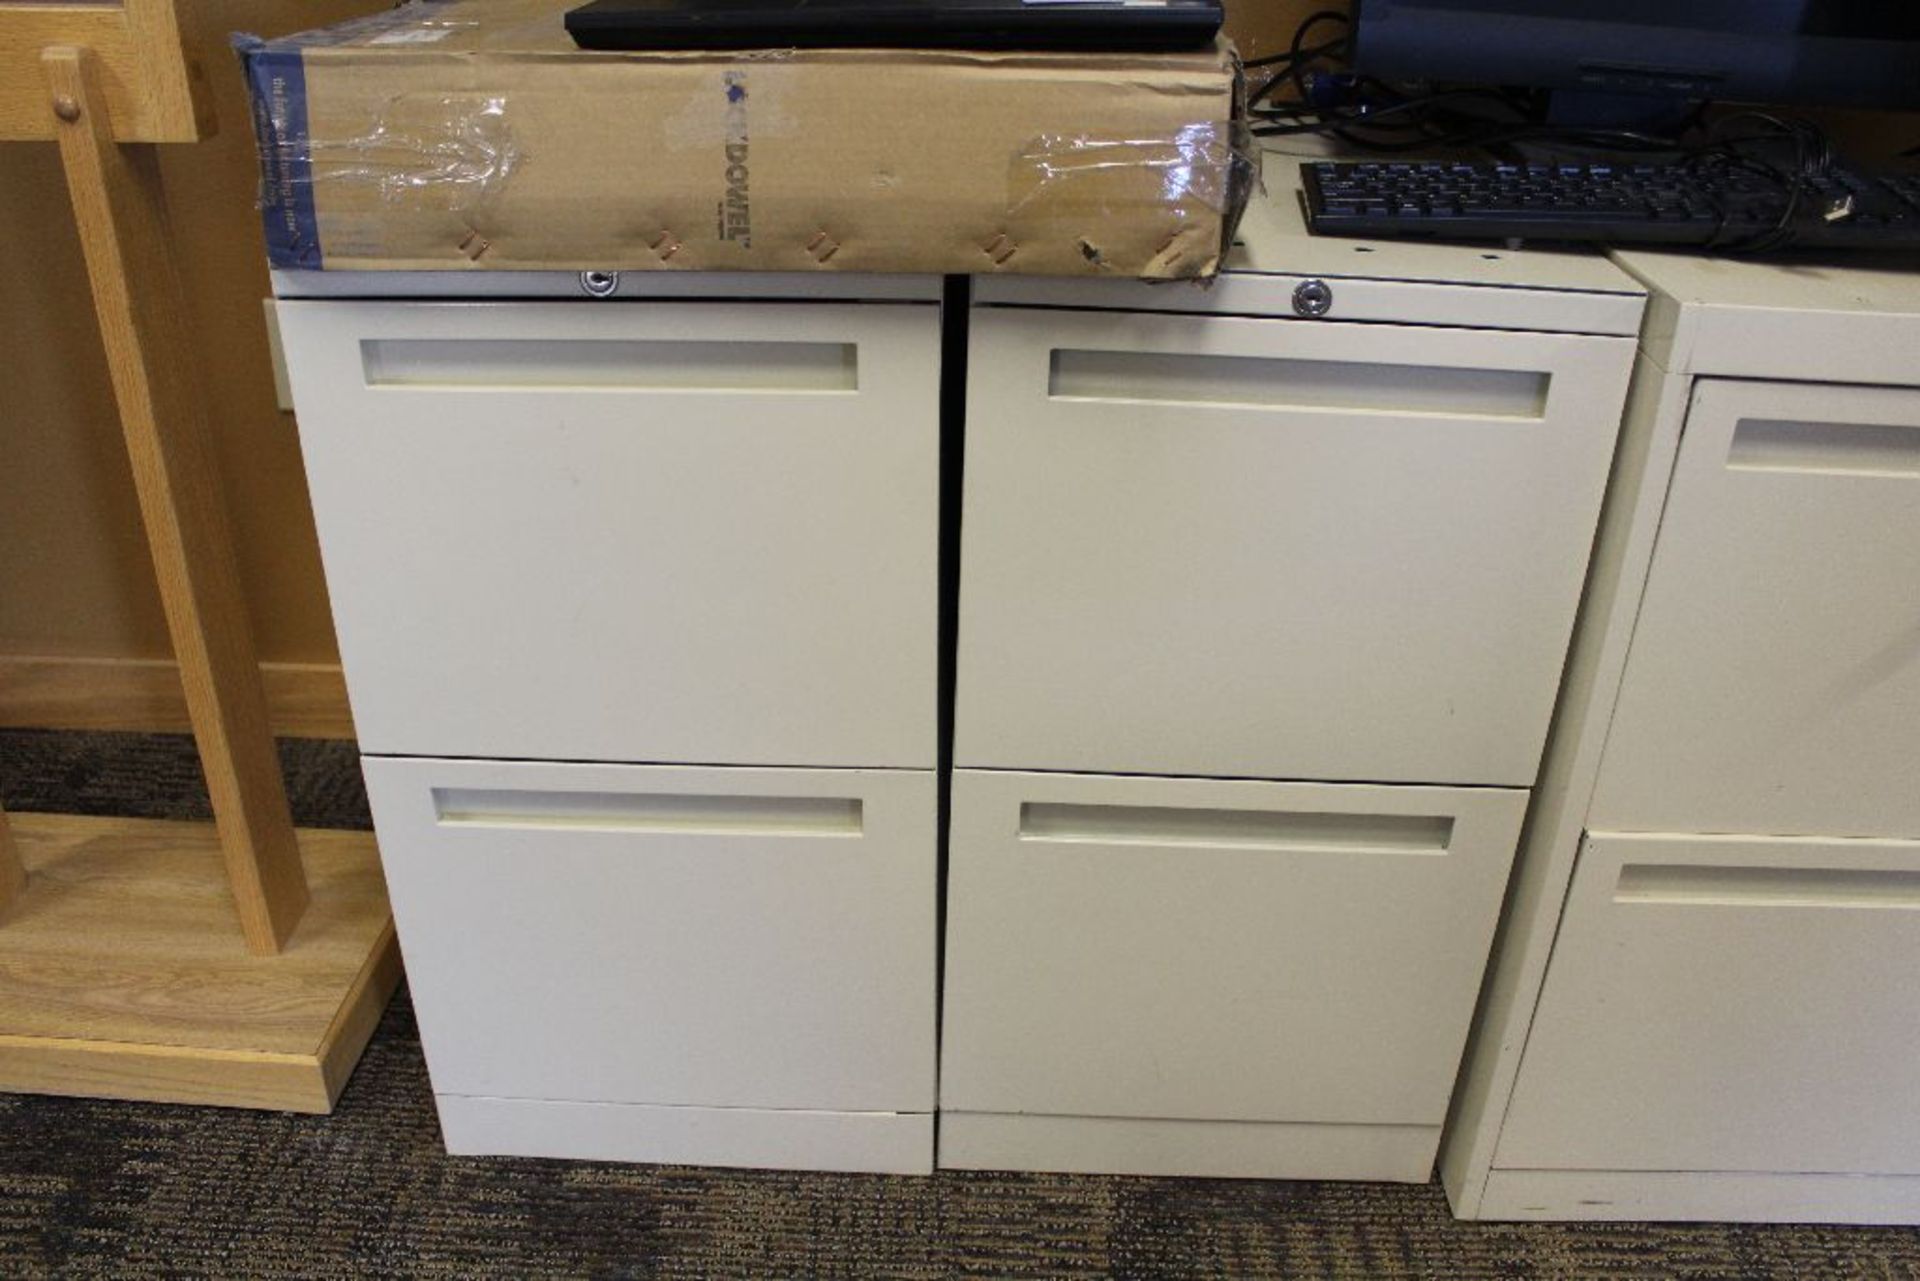 2 drawer file cabinets. - Image 2 of 2